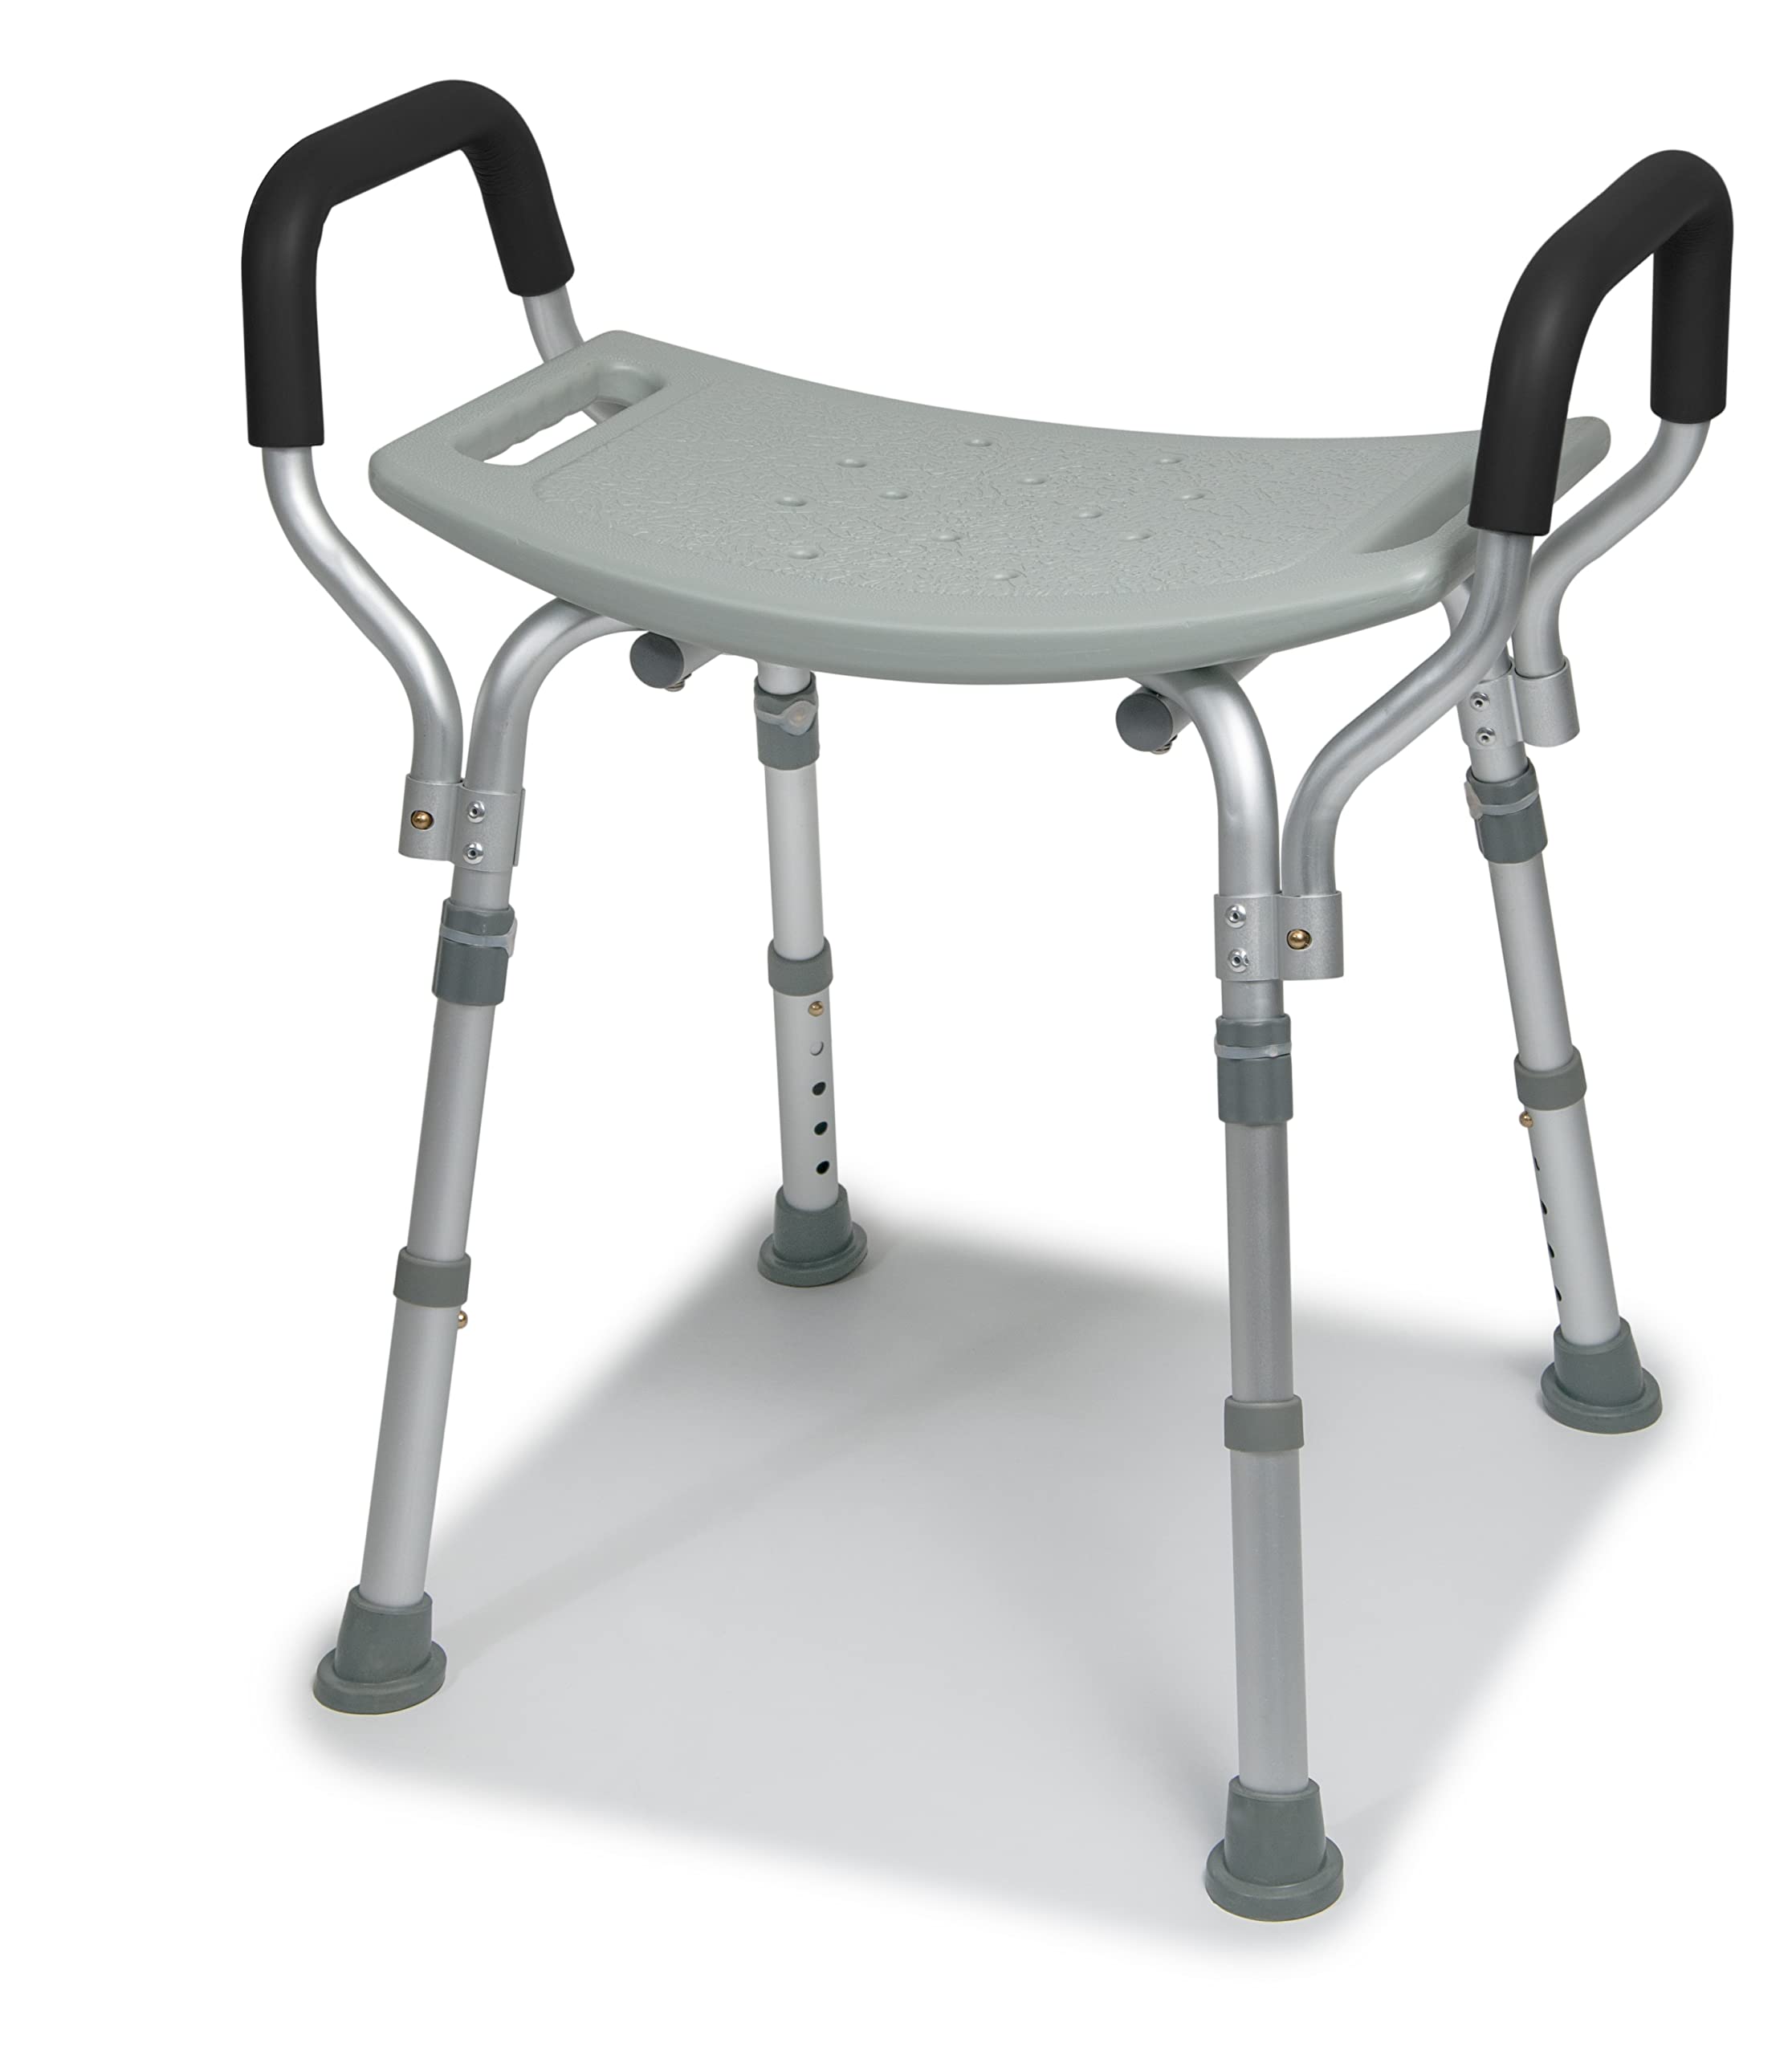 Lumex Platinum Collection Bath Seat with Support Arms - Retail Packaging, Standard Grey, Medical Shower Chair for Adults, 350 lbs Capacity, Pack of 4, 7931RA